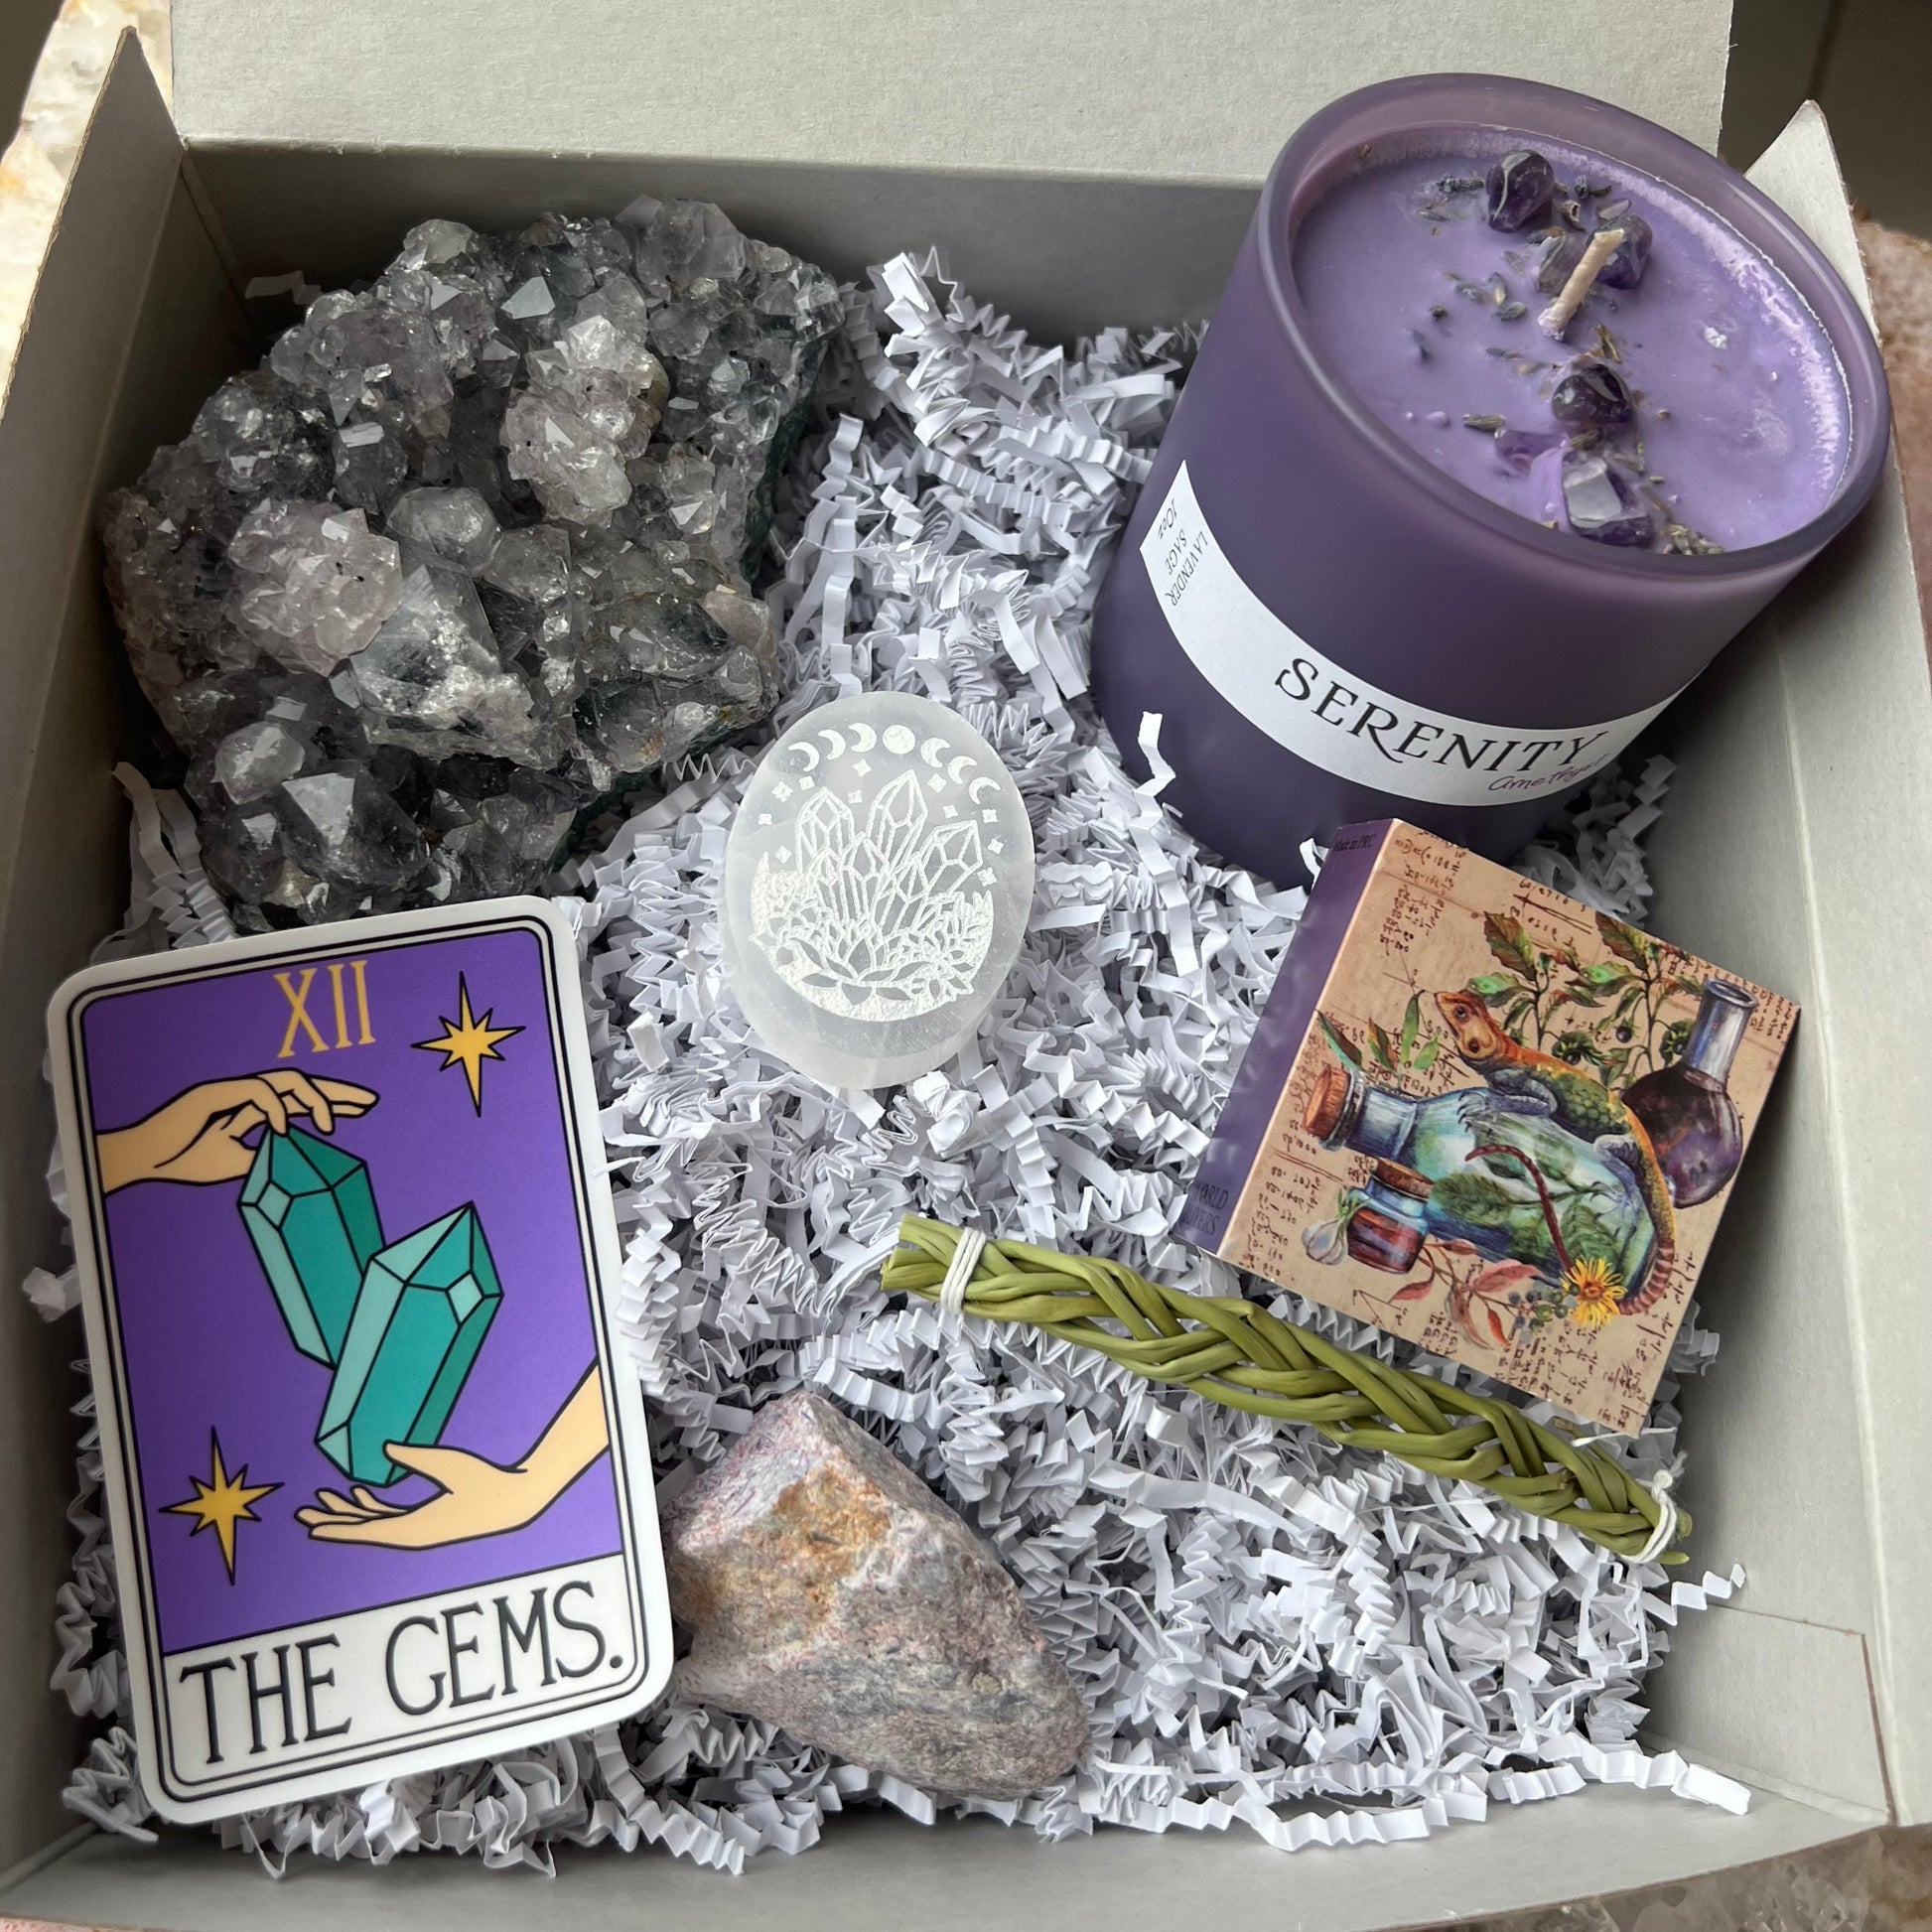  Crystal of the Month Subscription Box - Crystal Meditation -  Crystal Decorations - Crystal Gifts - Crystal Collectors - Healing Crystals